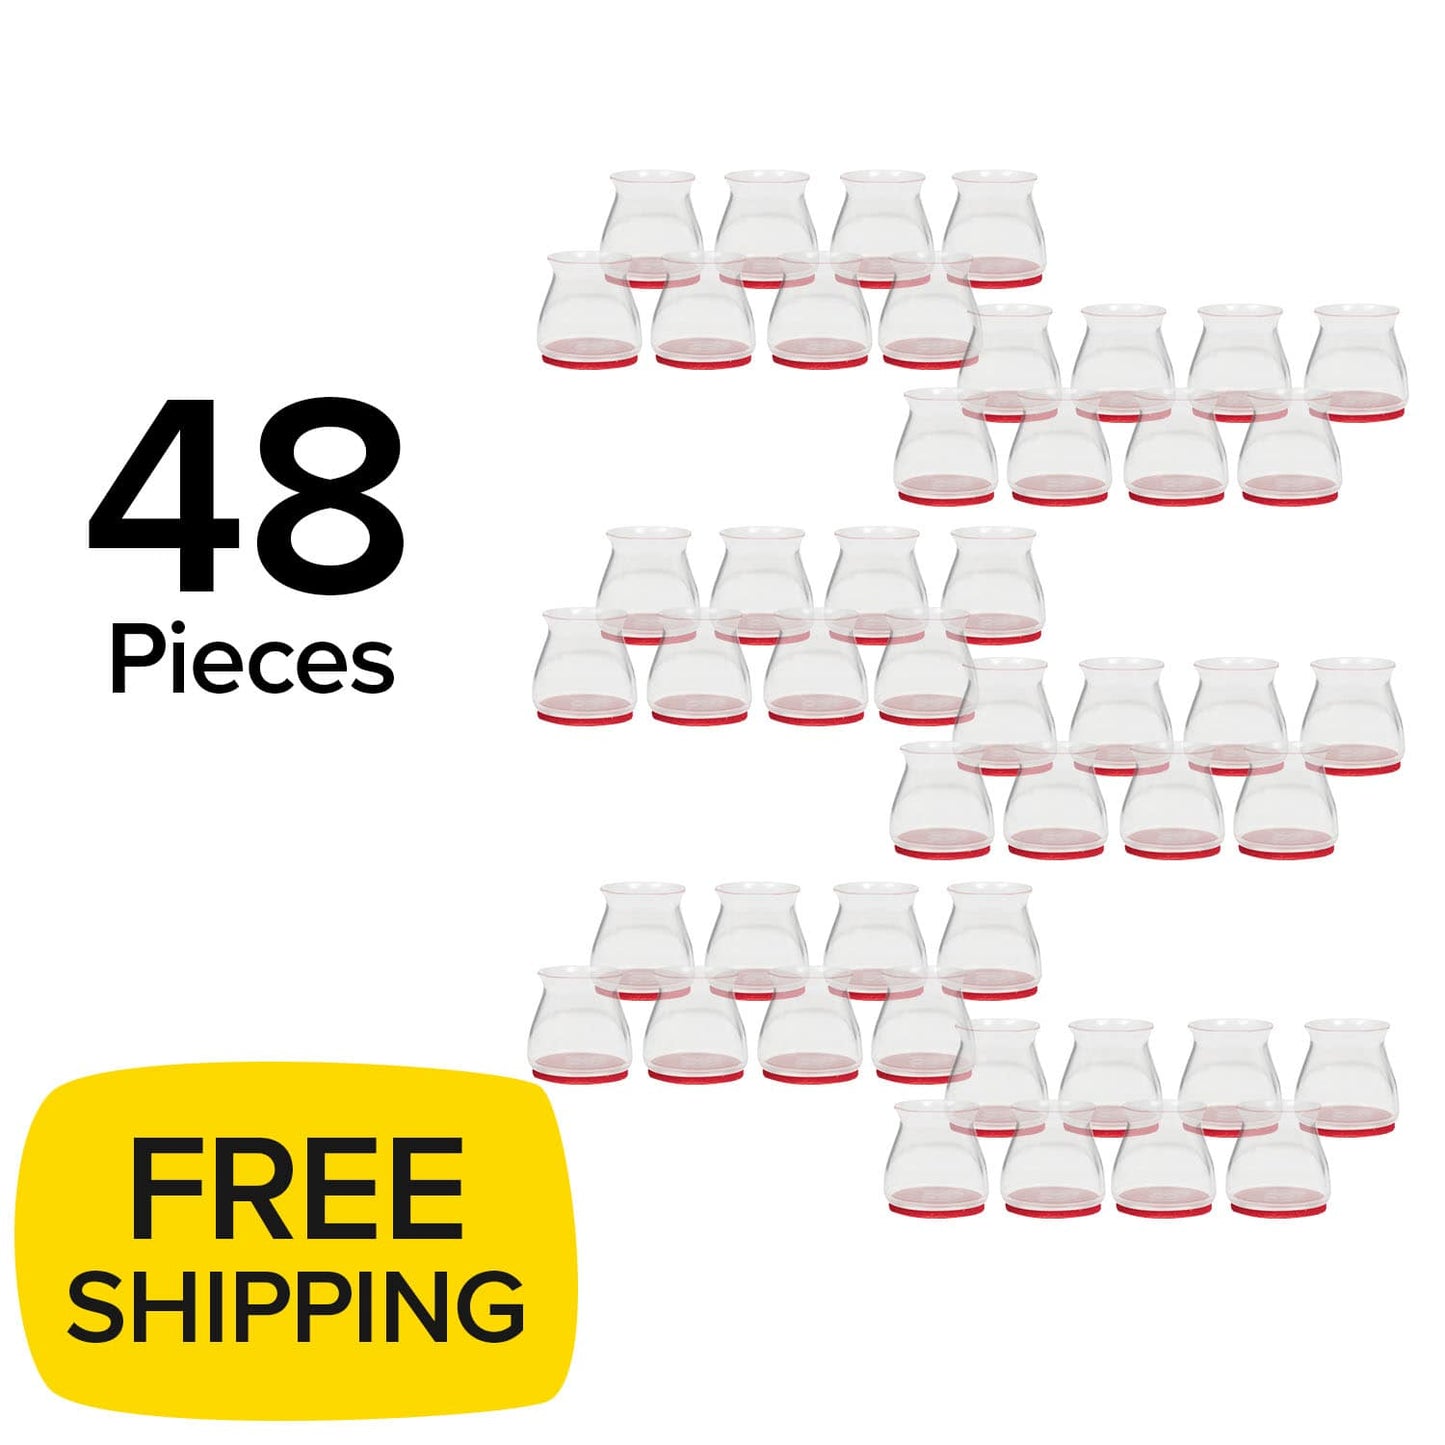 Ruby Sliders - 48 Pieces